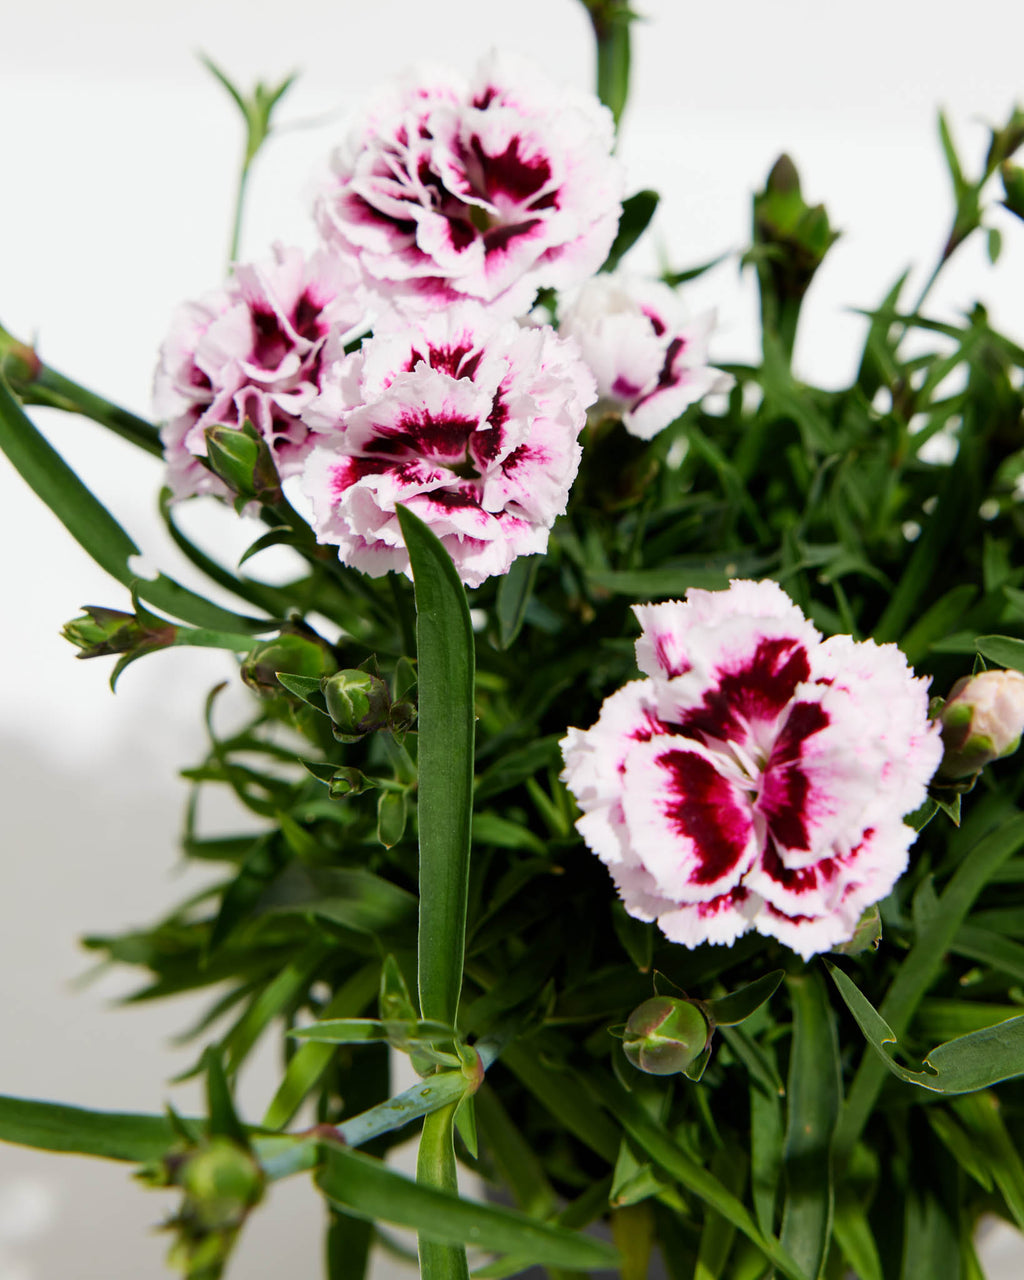 How to Grow and Care for Carnation (Complete Guide)